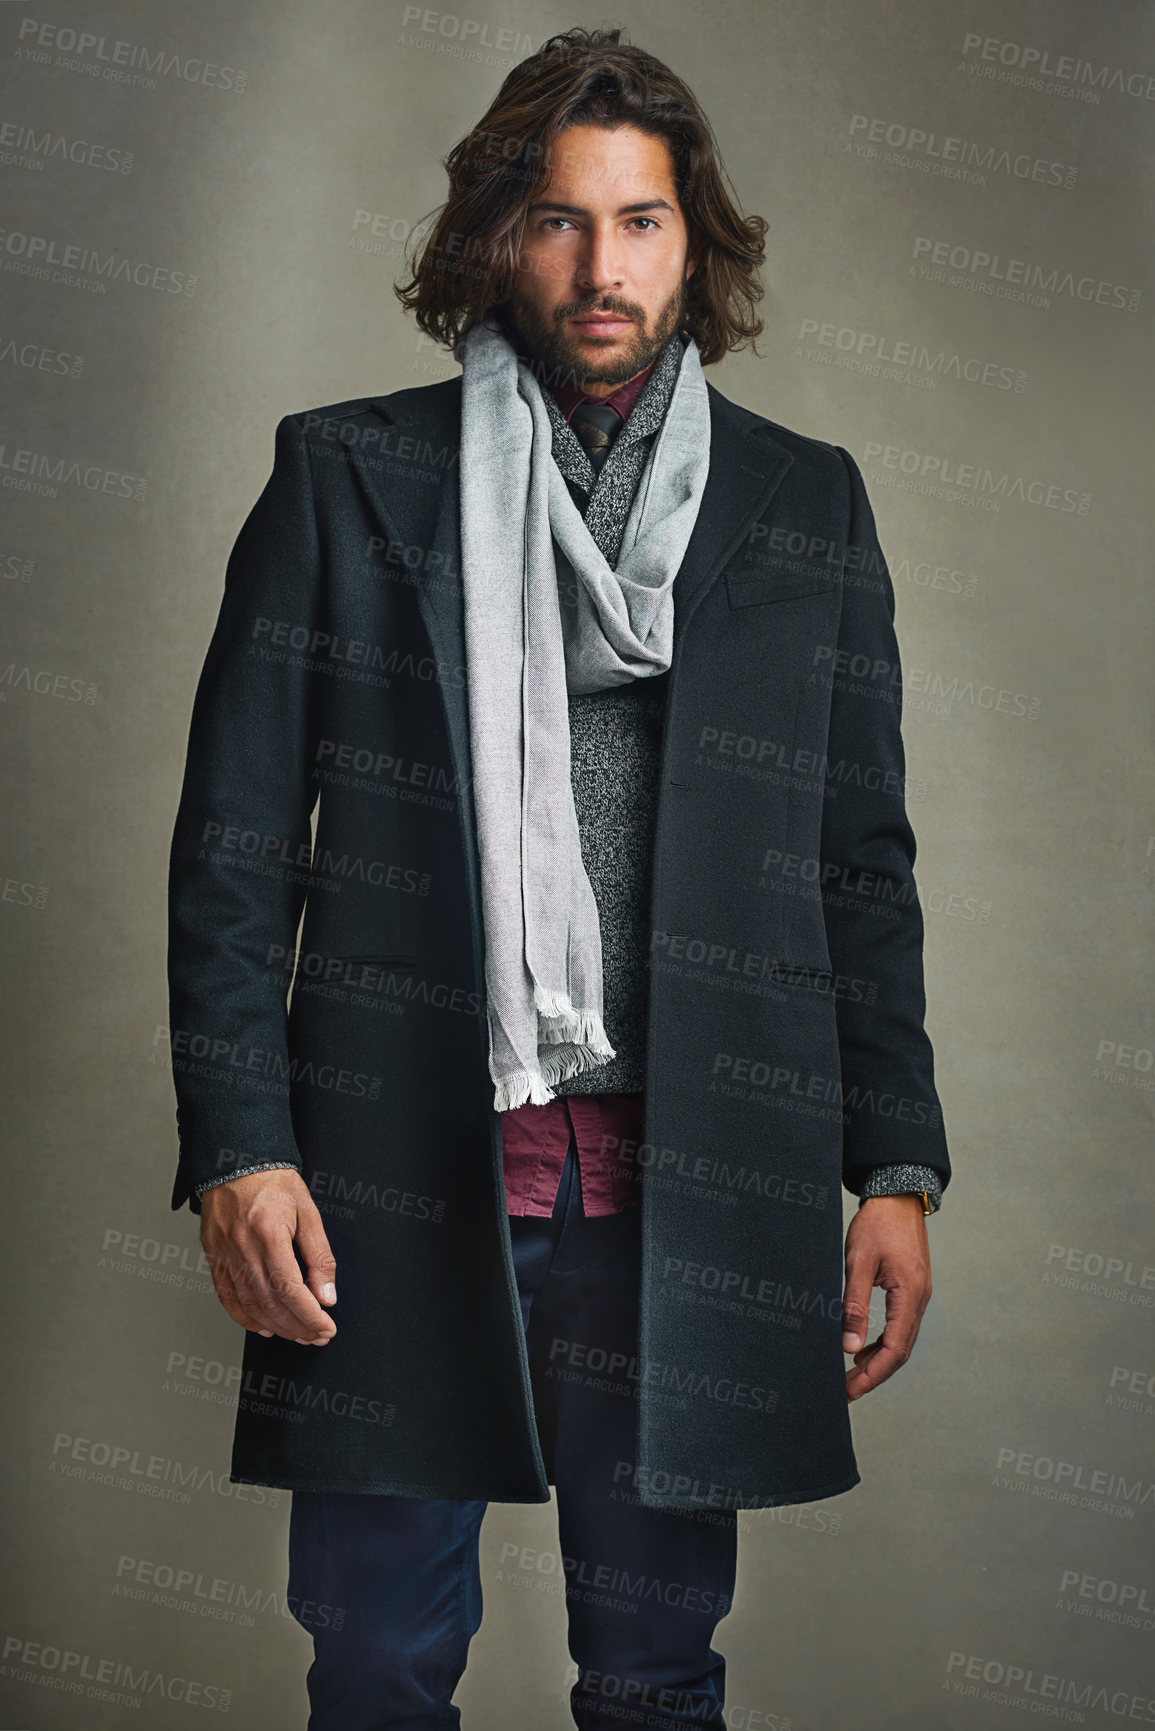 Buy stock photo Portrait of a stylishly dressed man posing against a gray background in the studio